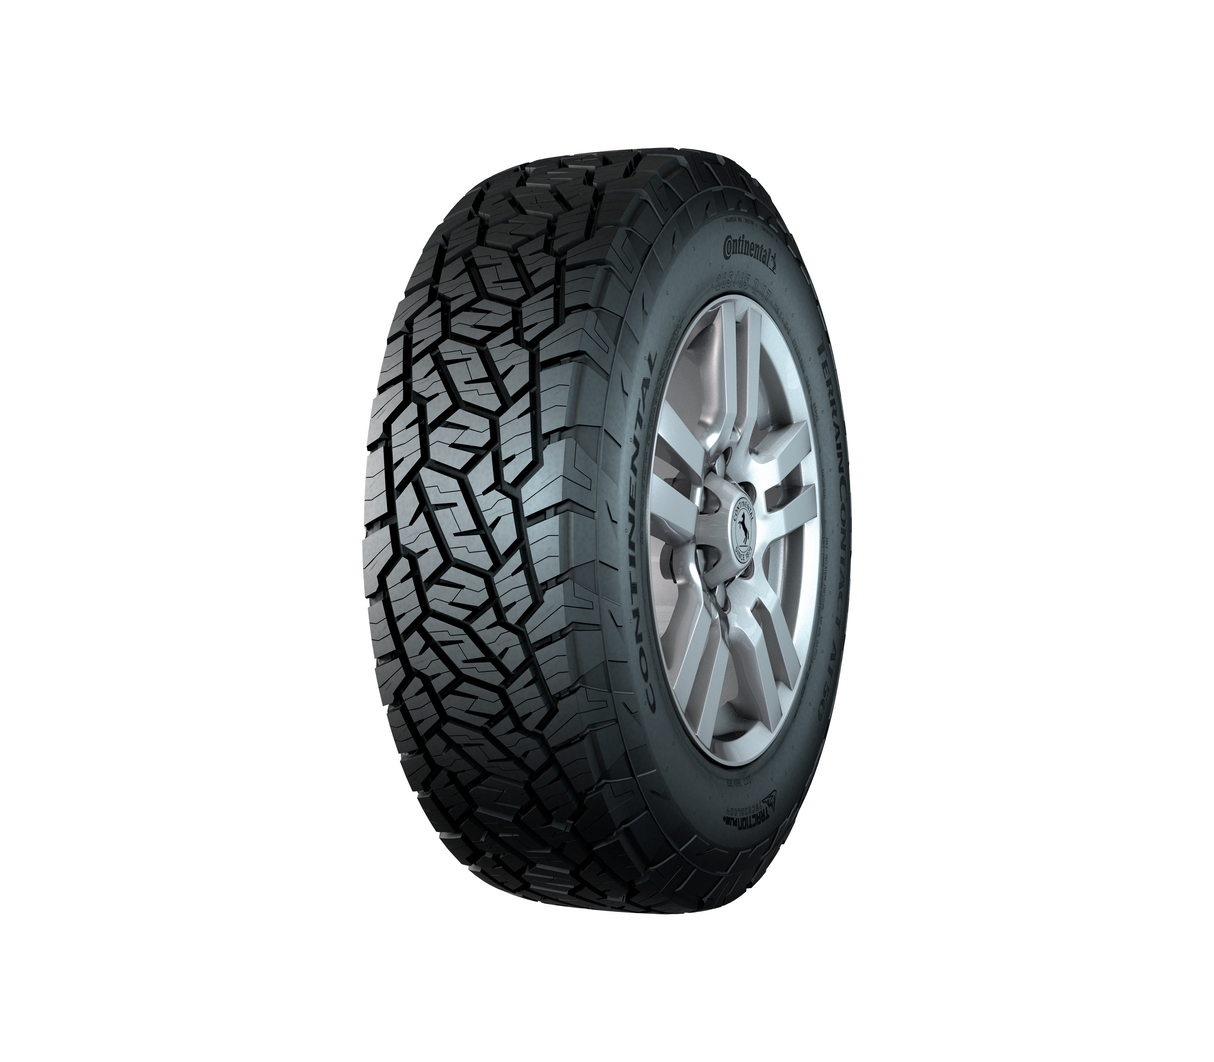 Neumático 225/70r16  103t  AT50 Continental